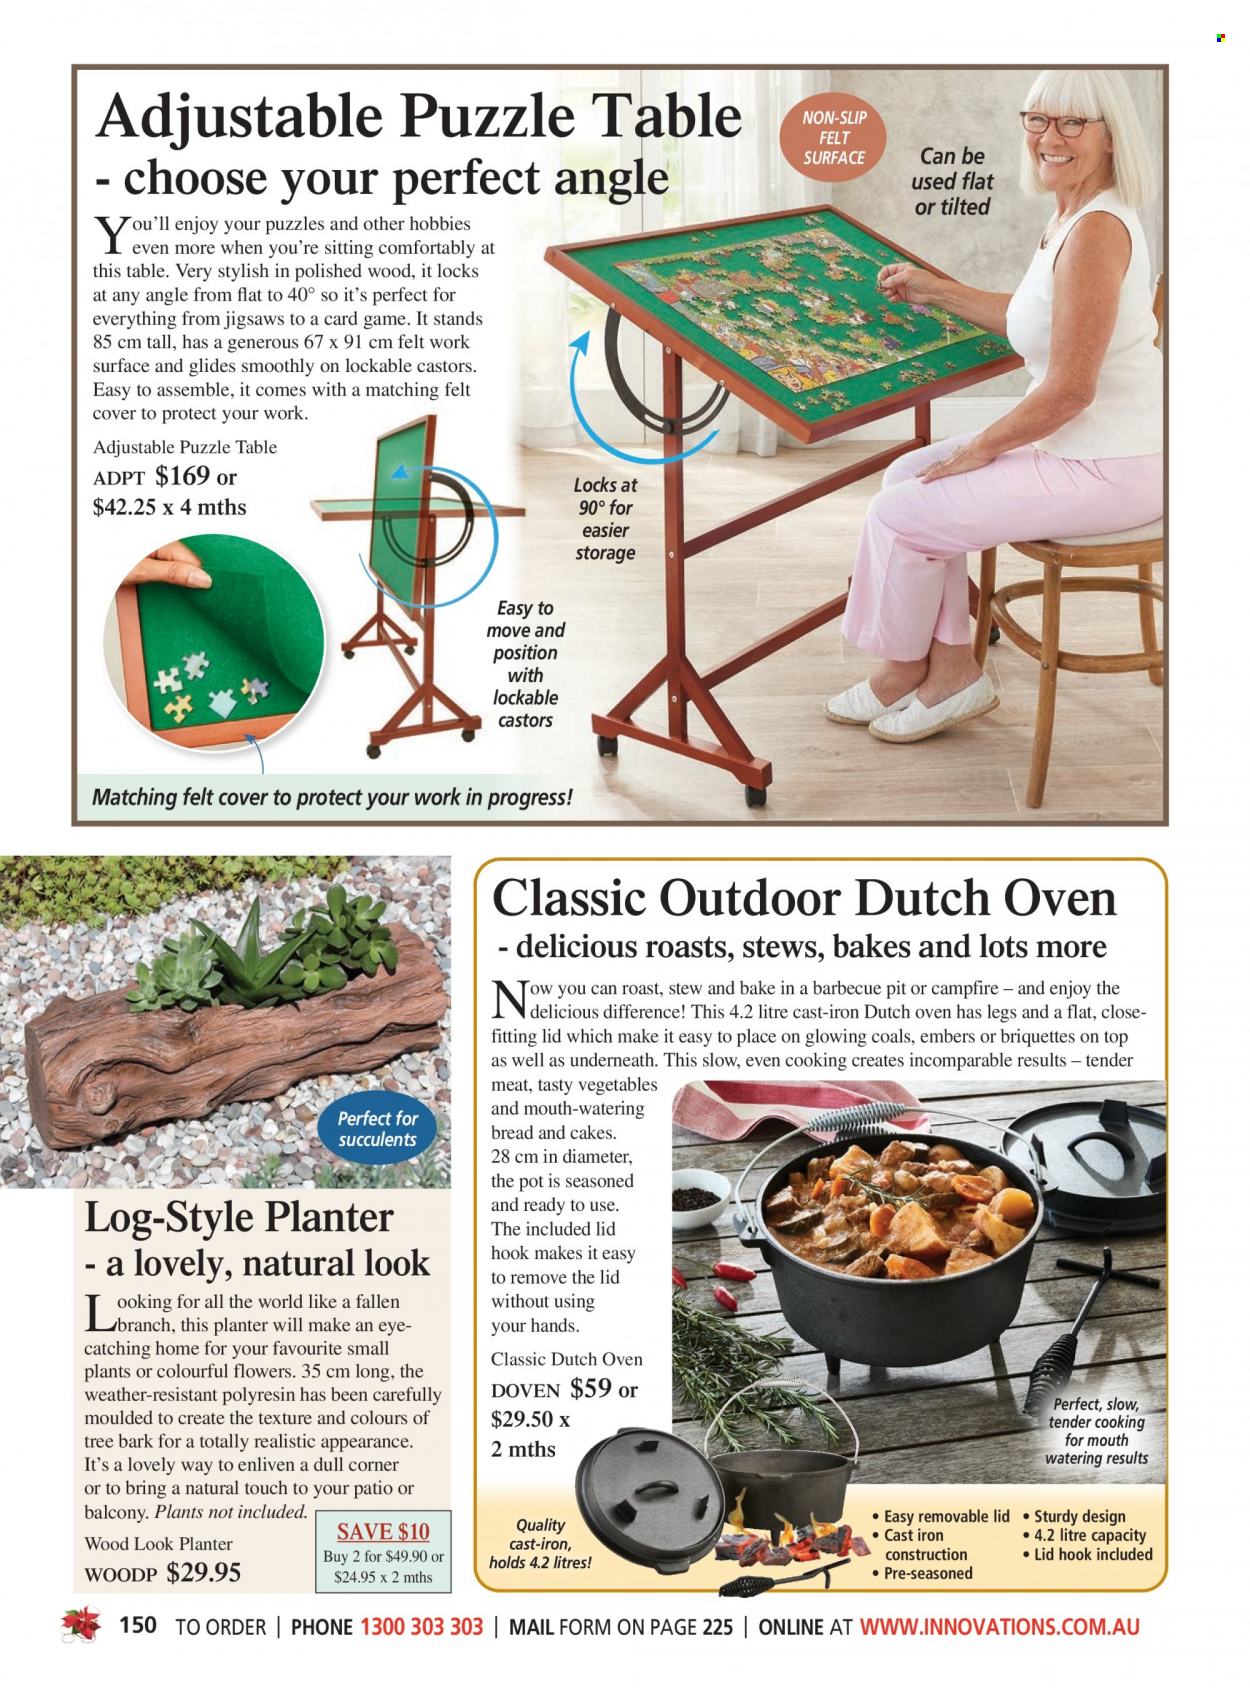 thumbnail - Innovations Catalogue - Sales products - hook, lid, pot, cast iron dutch oven, Campfire. Page 150.